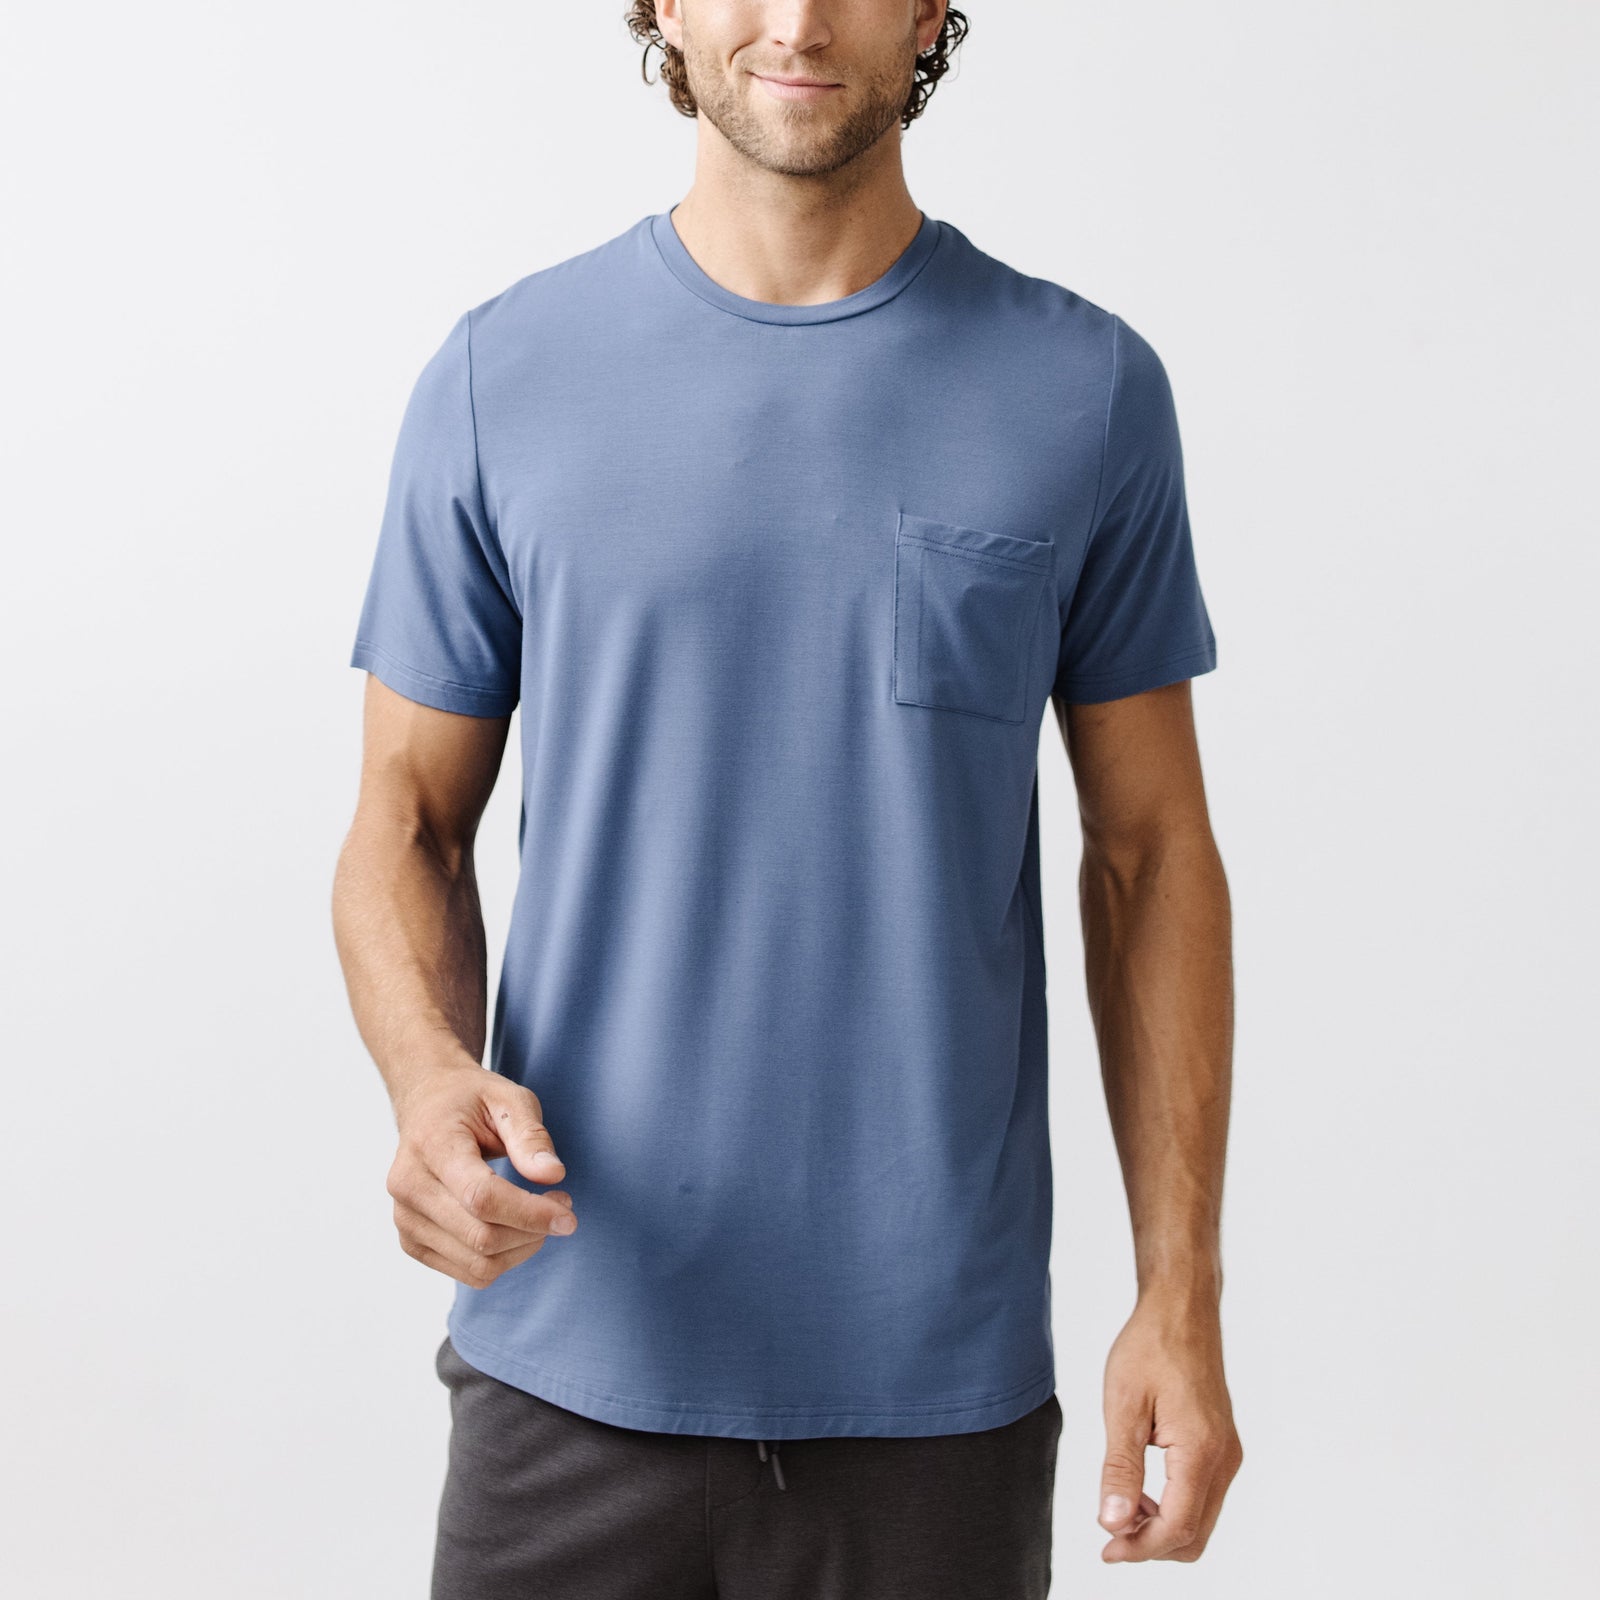 Blue Men's Stretch-Knit Bamboo Lounge Tee. A man is wearing the lounge tee in a well lit home.